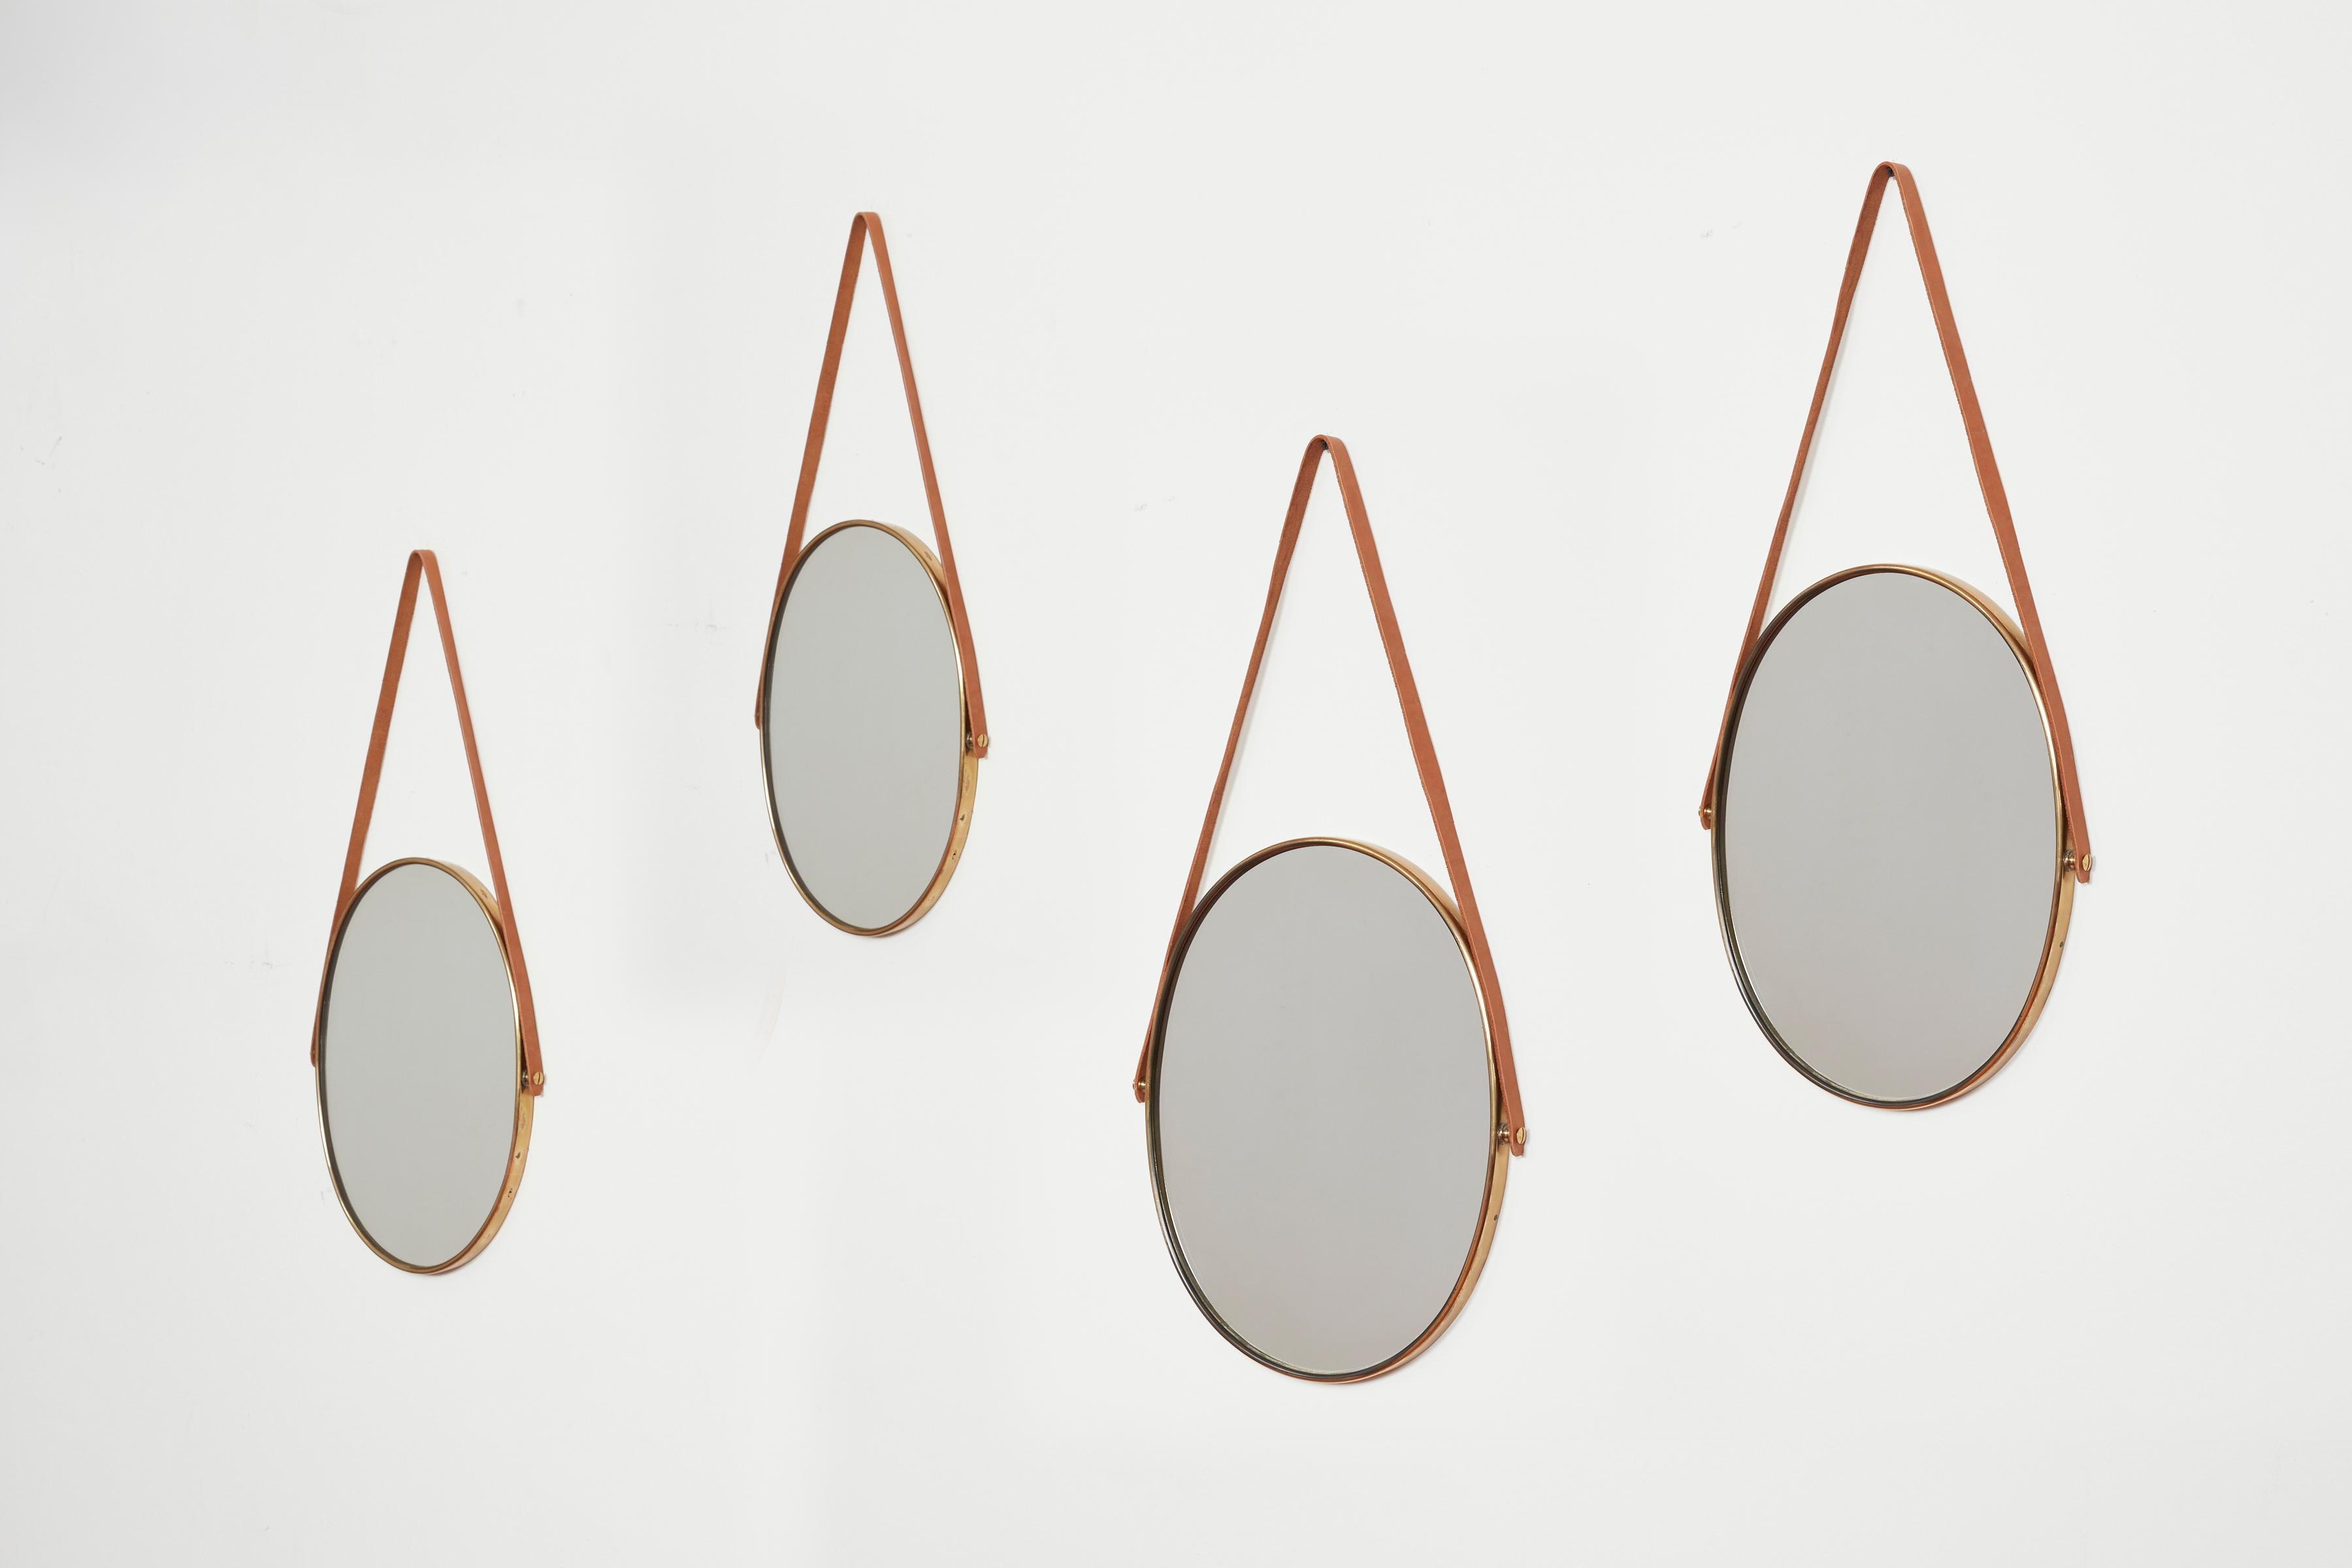 Italian 1950s brass and leather mirrors.
Thick brass edges - heavy and well made.
Priced individually
Four available.